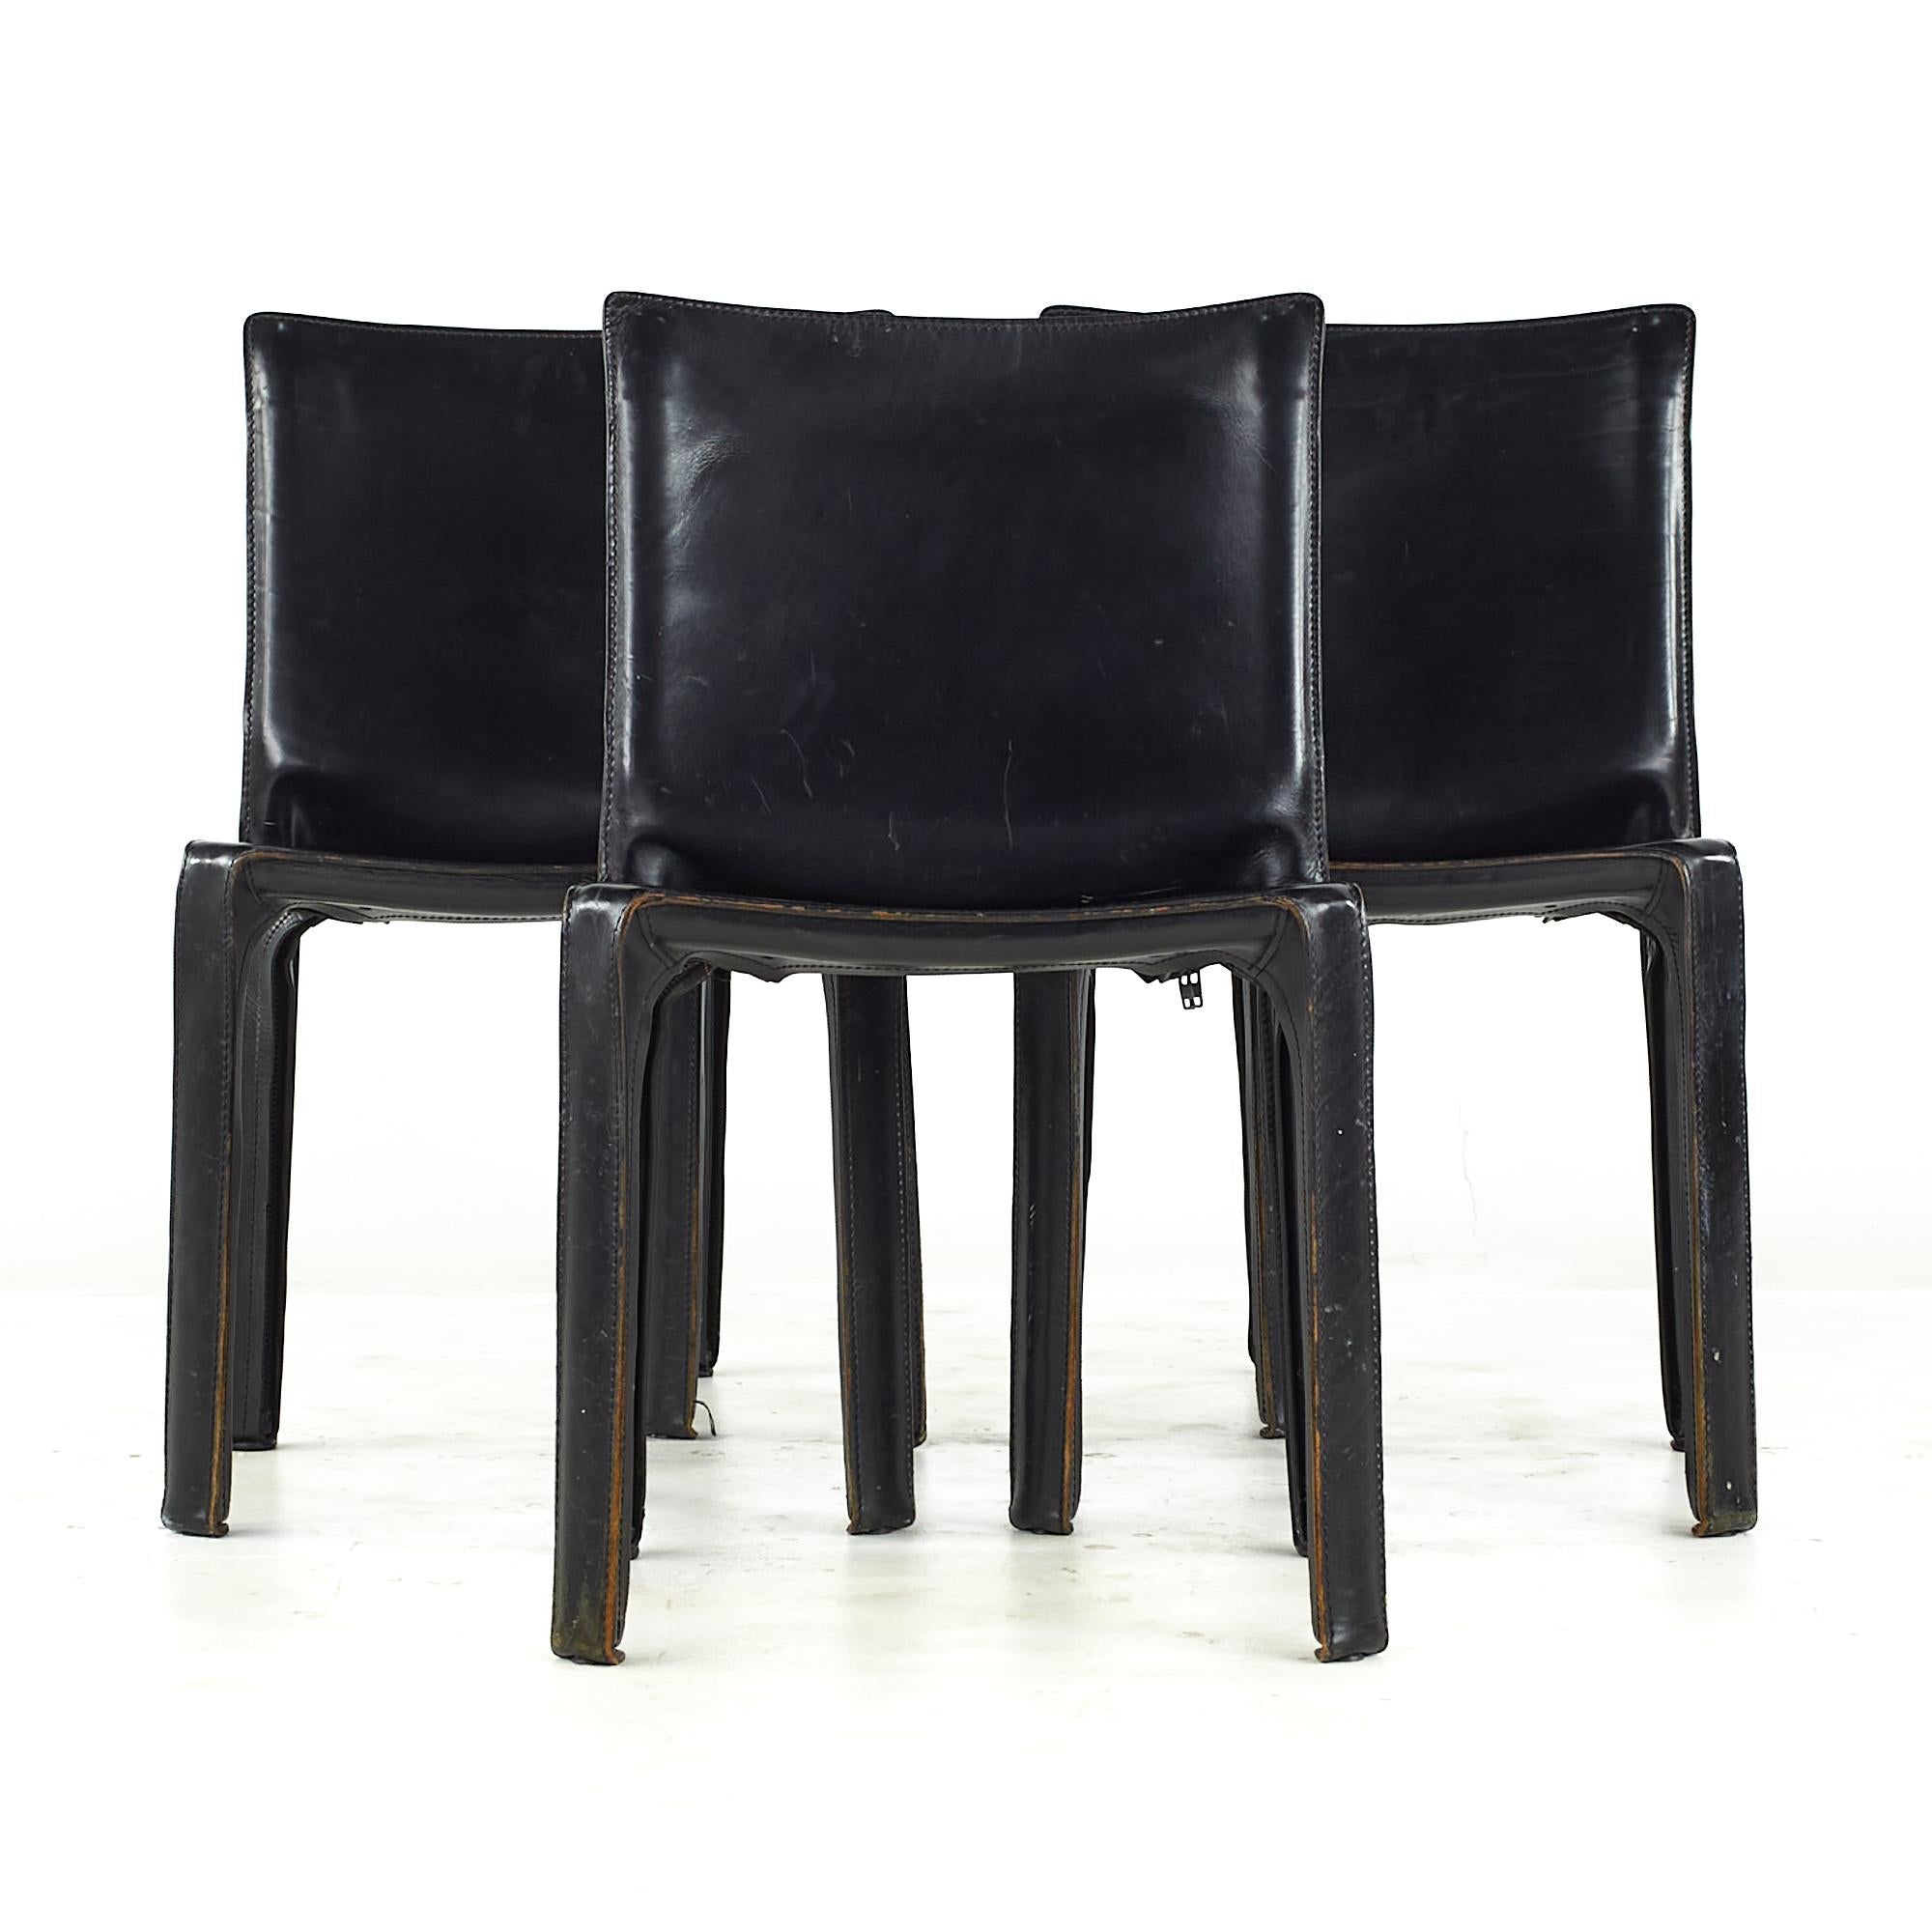 Mario Bellini for Cassina midcentury Cab Side Chairs – Set of 4

Each chair measures: 18.5 wide x 17.5 deep x 31.5 inches high, with a seat height/chair clearance of 17.5 inches

All pieces of furniture can be had in what we call restored